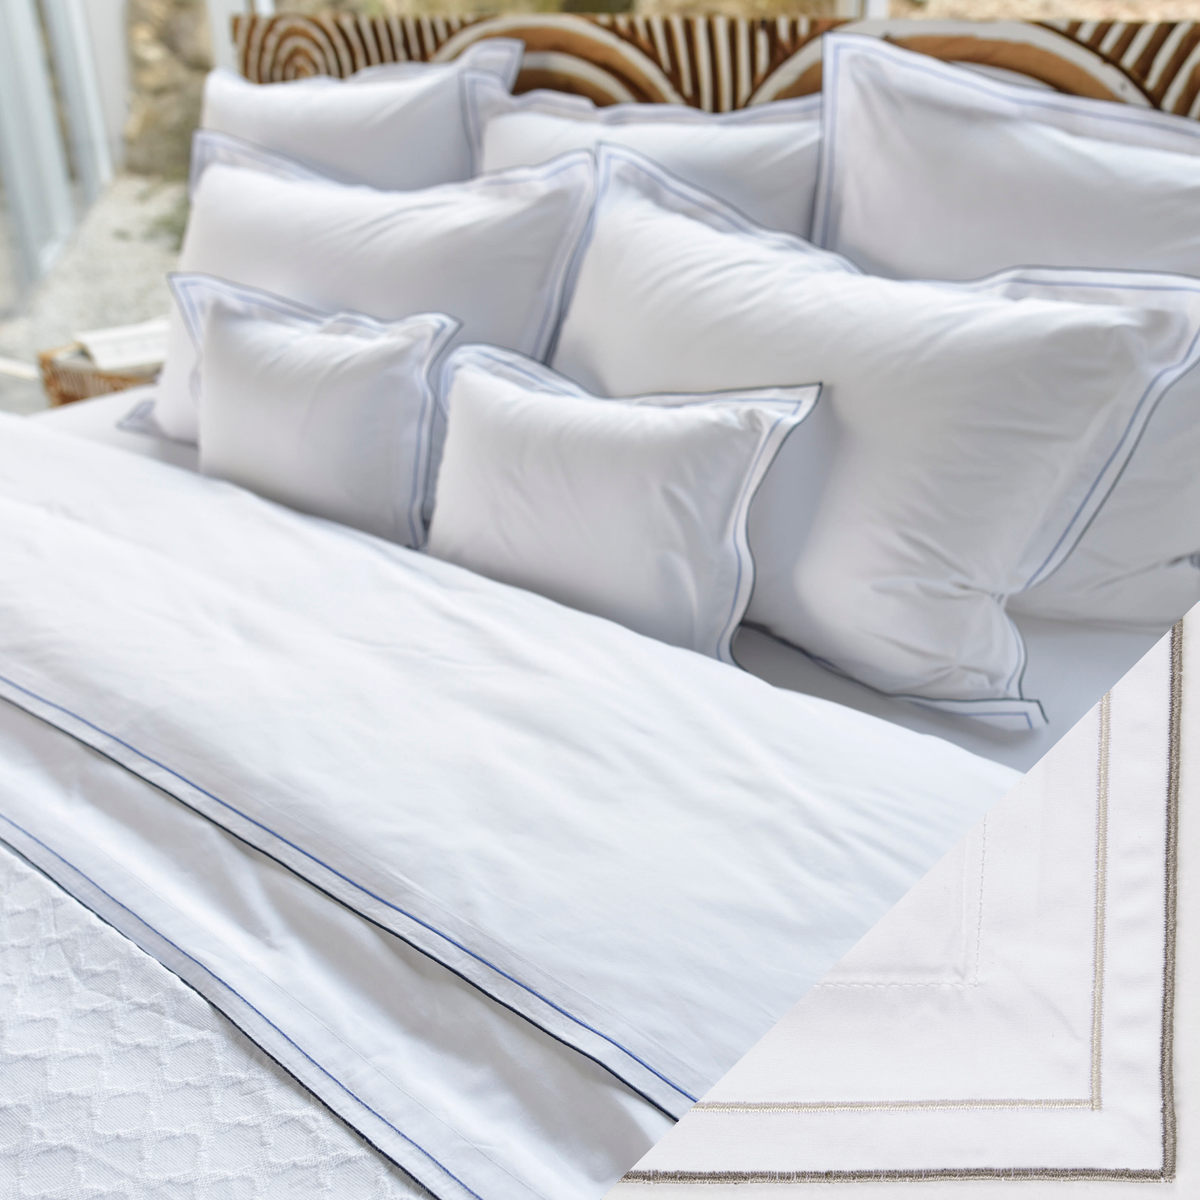 Lifestyle Shot of Celso de Lemos Areo Bedding with Eucalyptus Swatch